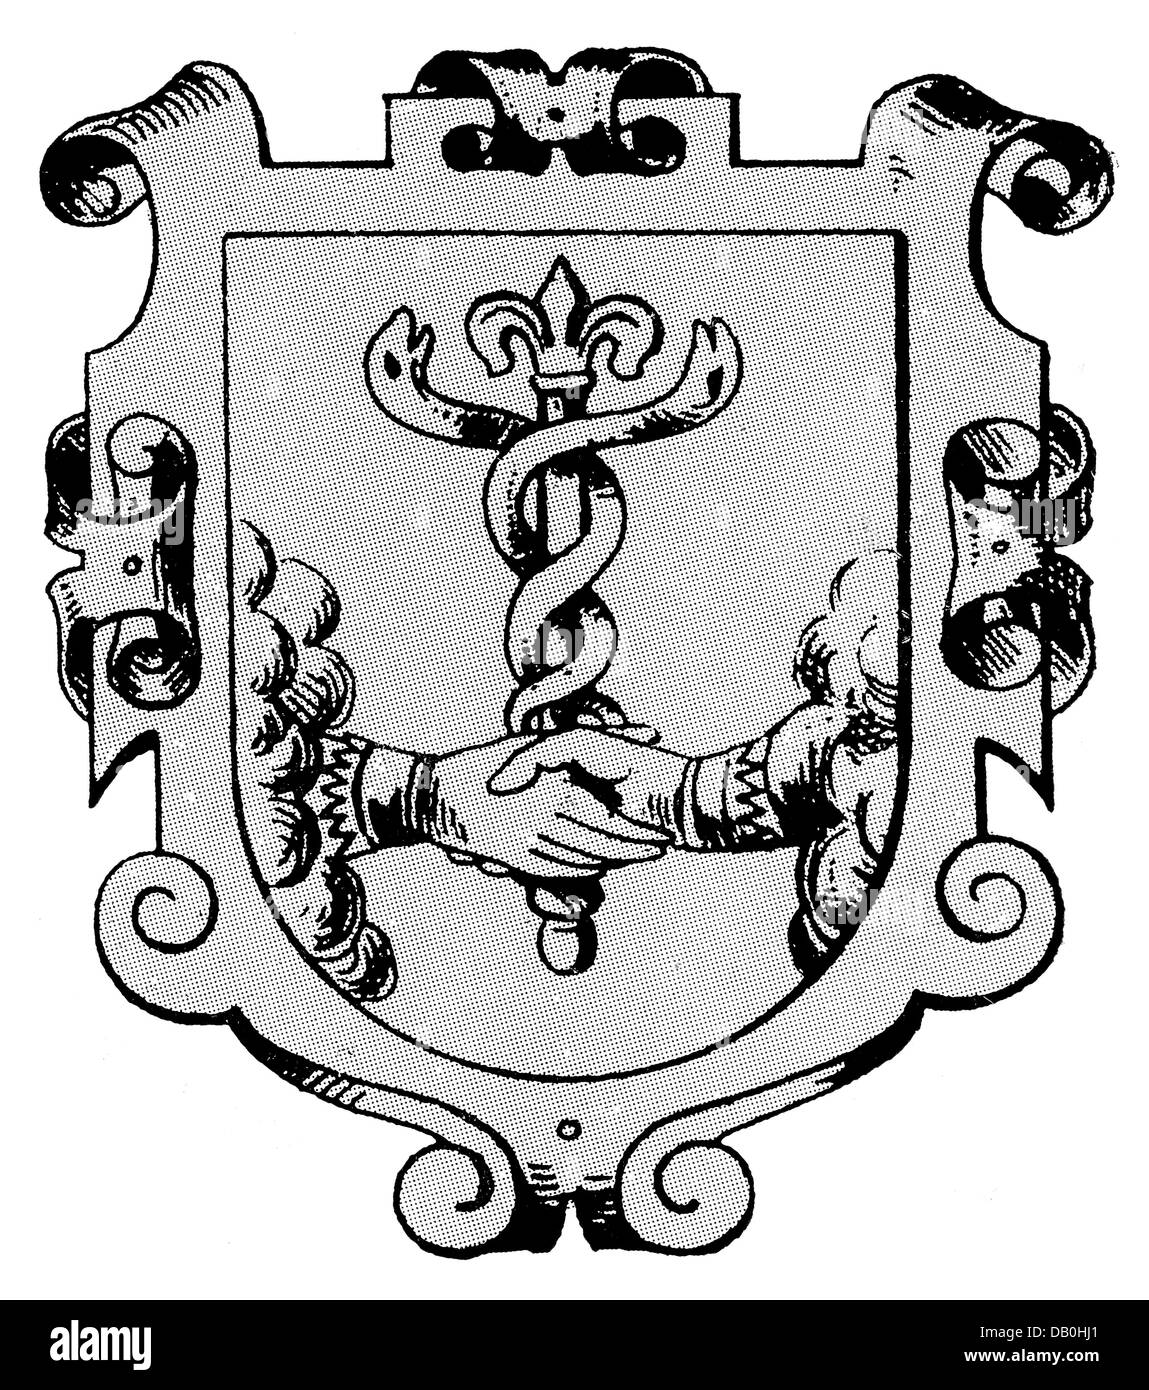 barber coat of arms